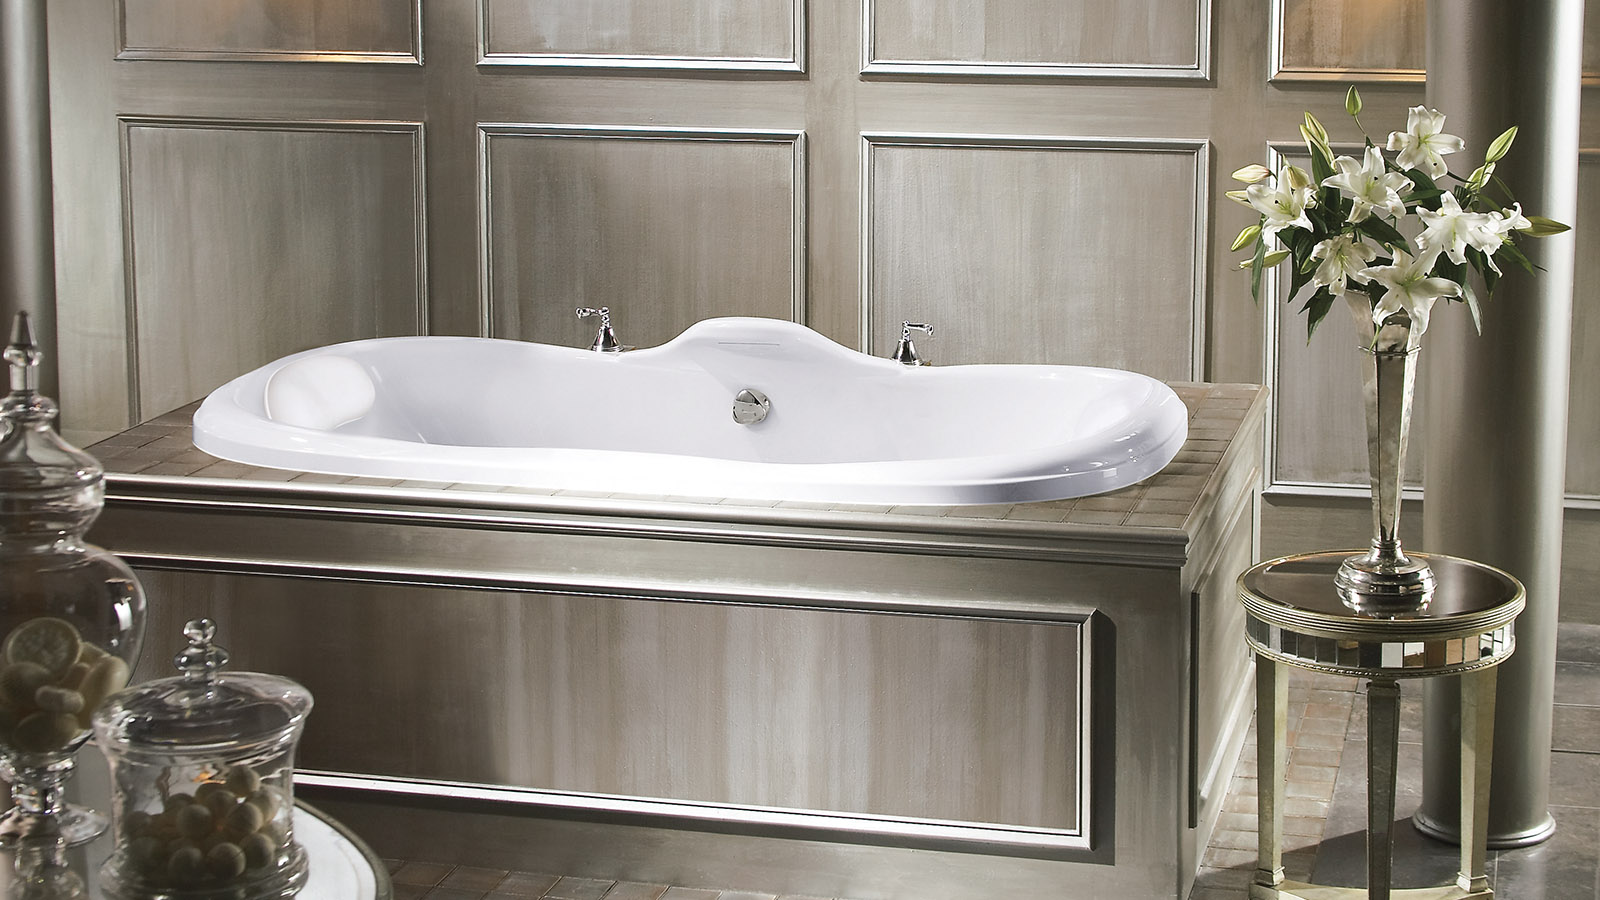 Image of a soaker tub skirted by a wooden platform.